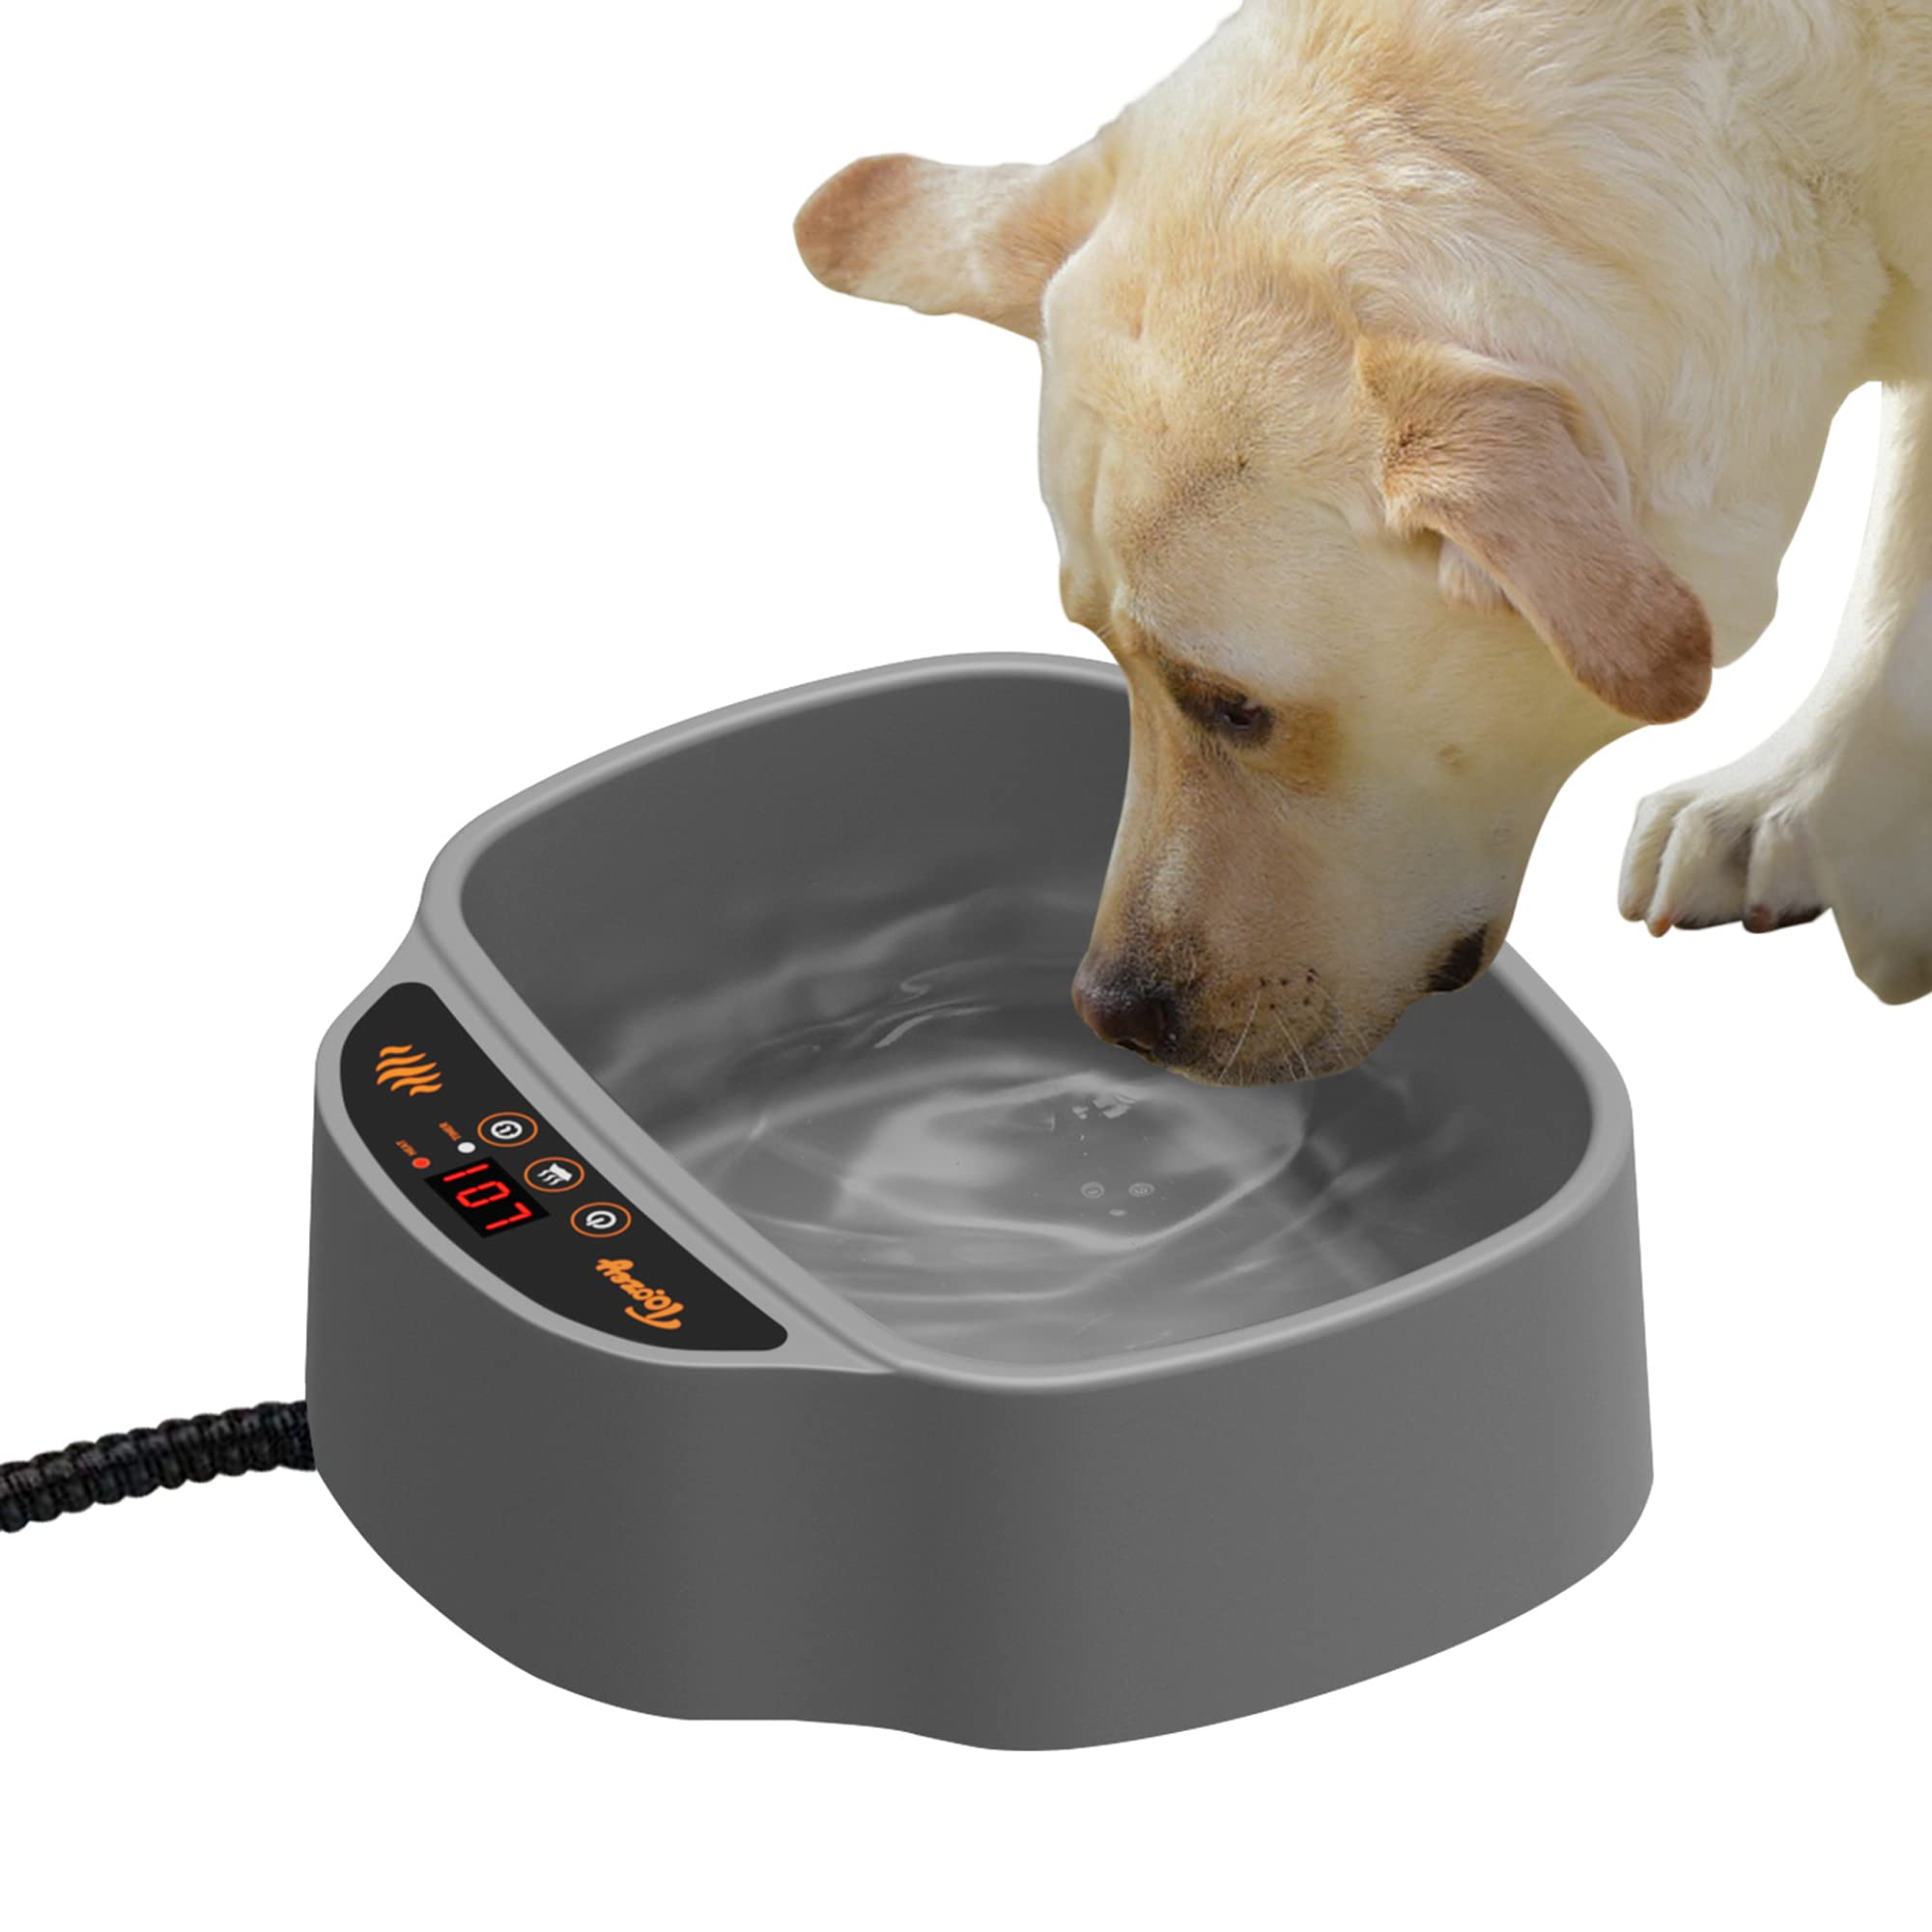 Toozey Heated Dog Bowl, 2 Adjustable Temperature Heated Water Bowl